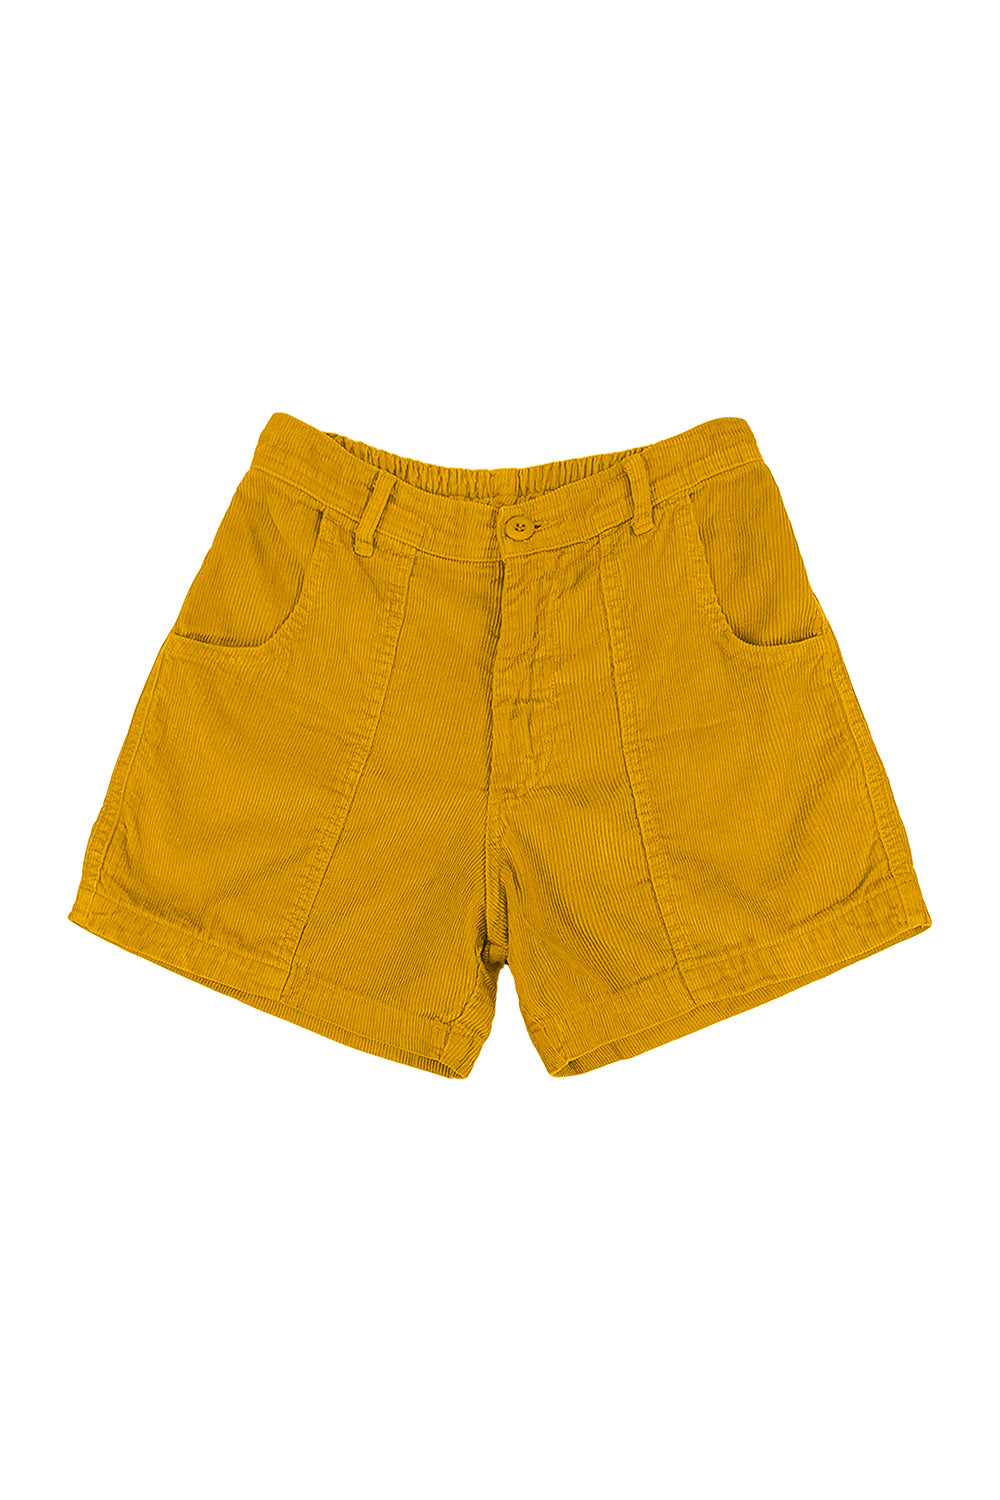 Cabuya Cord Short | Jungmaven Hemp Clothing & Accessories / Color: Spicy Mustard